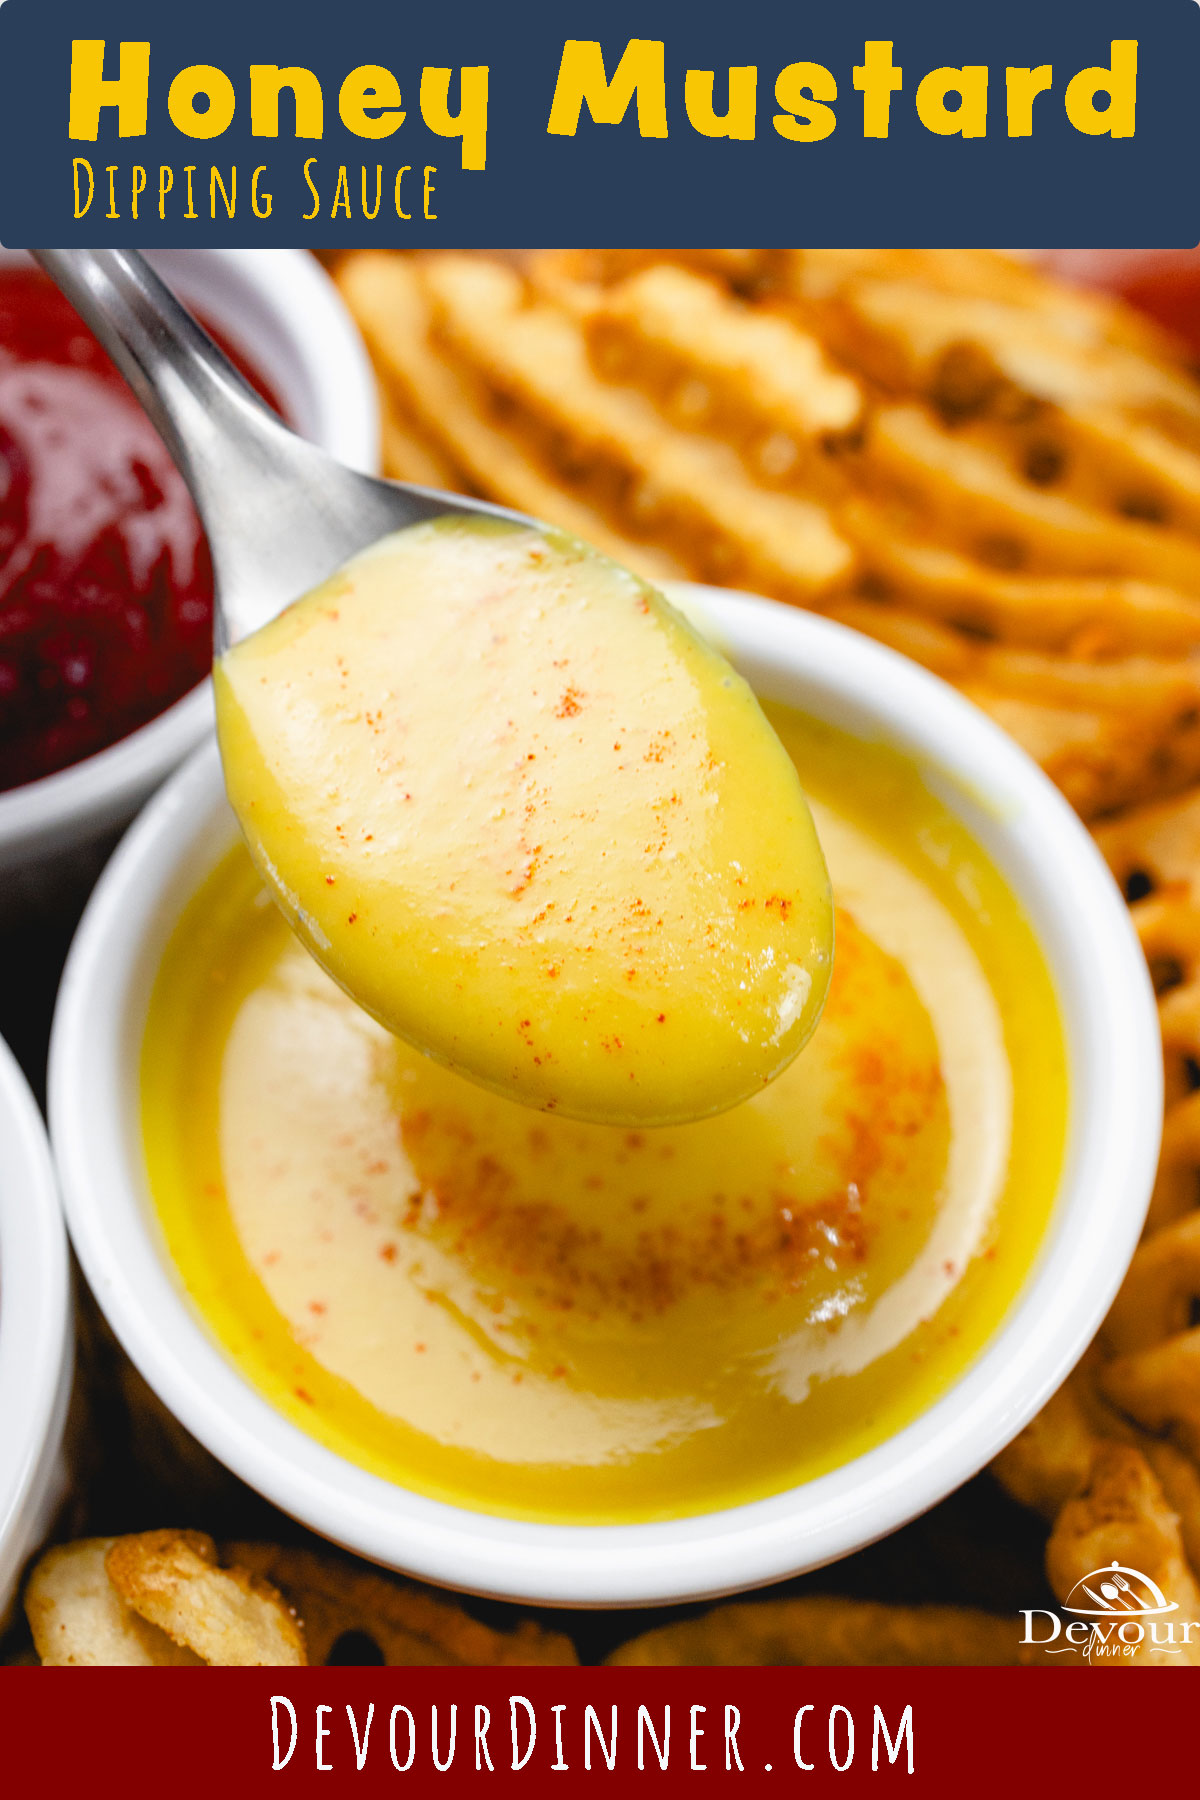 Honey Mustard Dipping Sauce blends sweet raw honey, zesty mustard, and creamy mayo into the best sauce to ever grace your fries! The sweet and tangy flavors make this the perfect dipping sauce for crispy chicken nuggets, sweet potato fries, onion rings, and more!